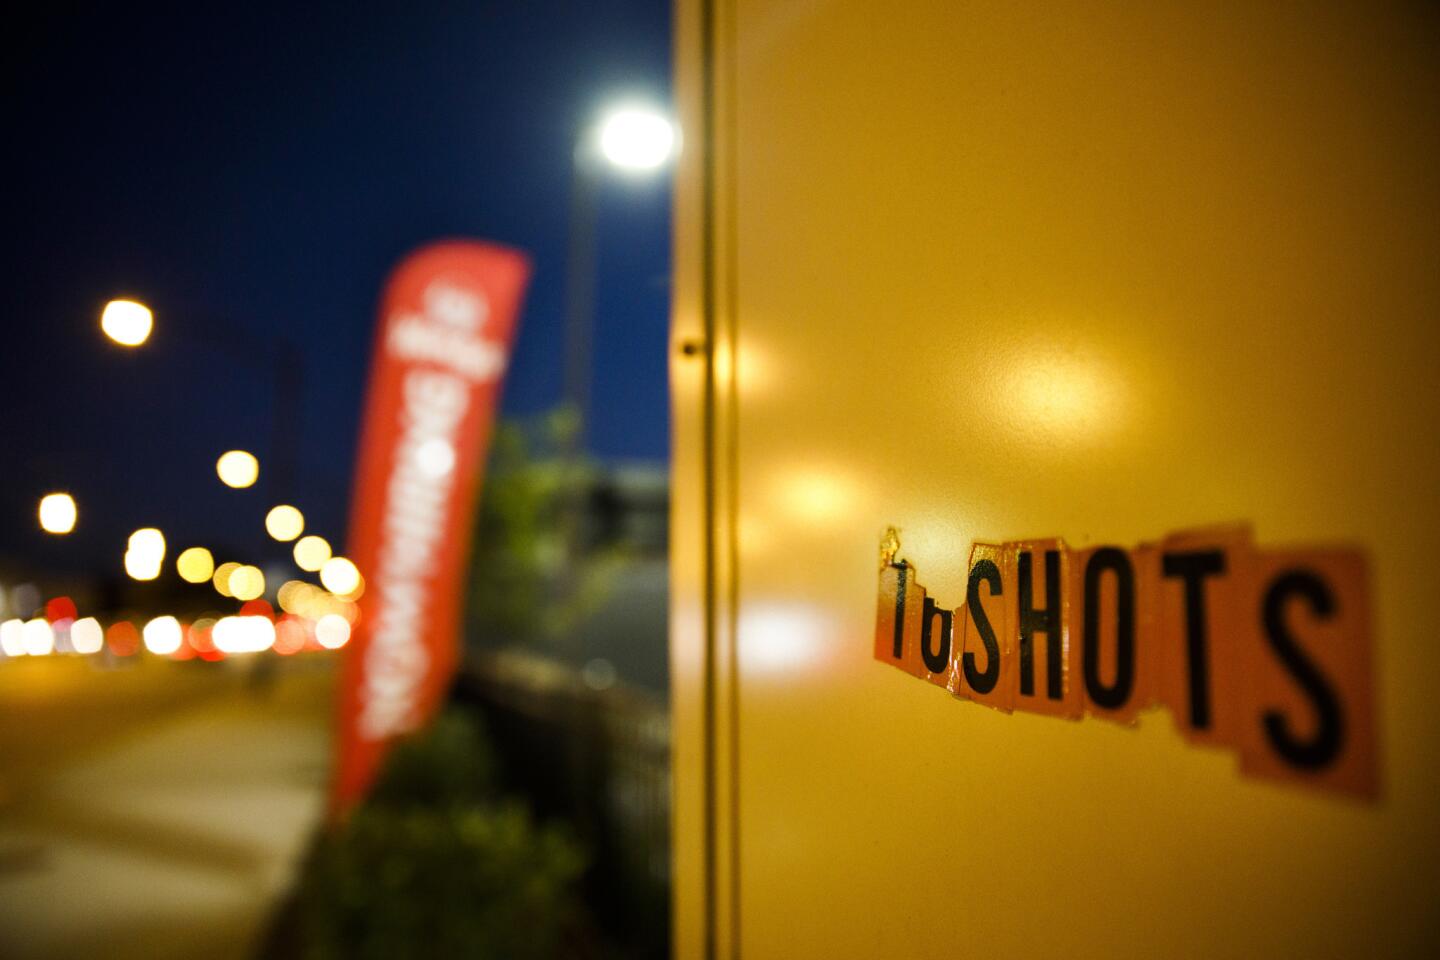 The phrase "16 shots" is attached to the side of a sign in the 4100 block of South Pulaski Road on Sept. 13, 2018, near the location where Laquan McDonald was shot by Chicago officer Jason Van Dyke in 2014. (Armando L. Sanchez/Chicago Tribune)